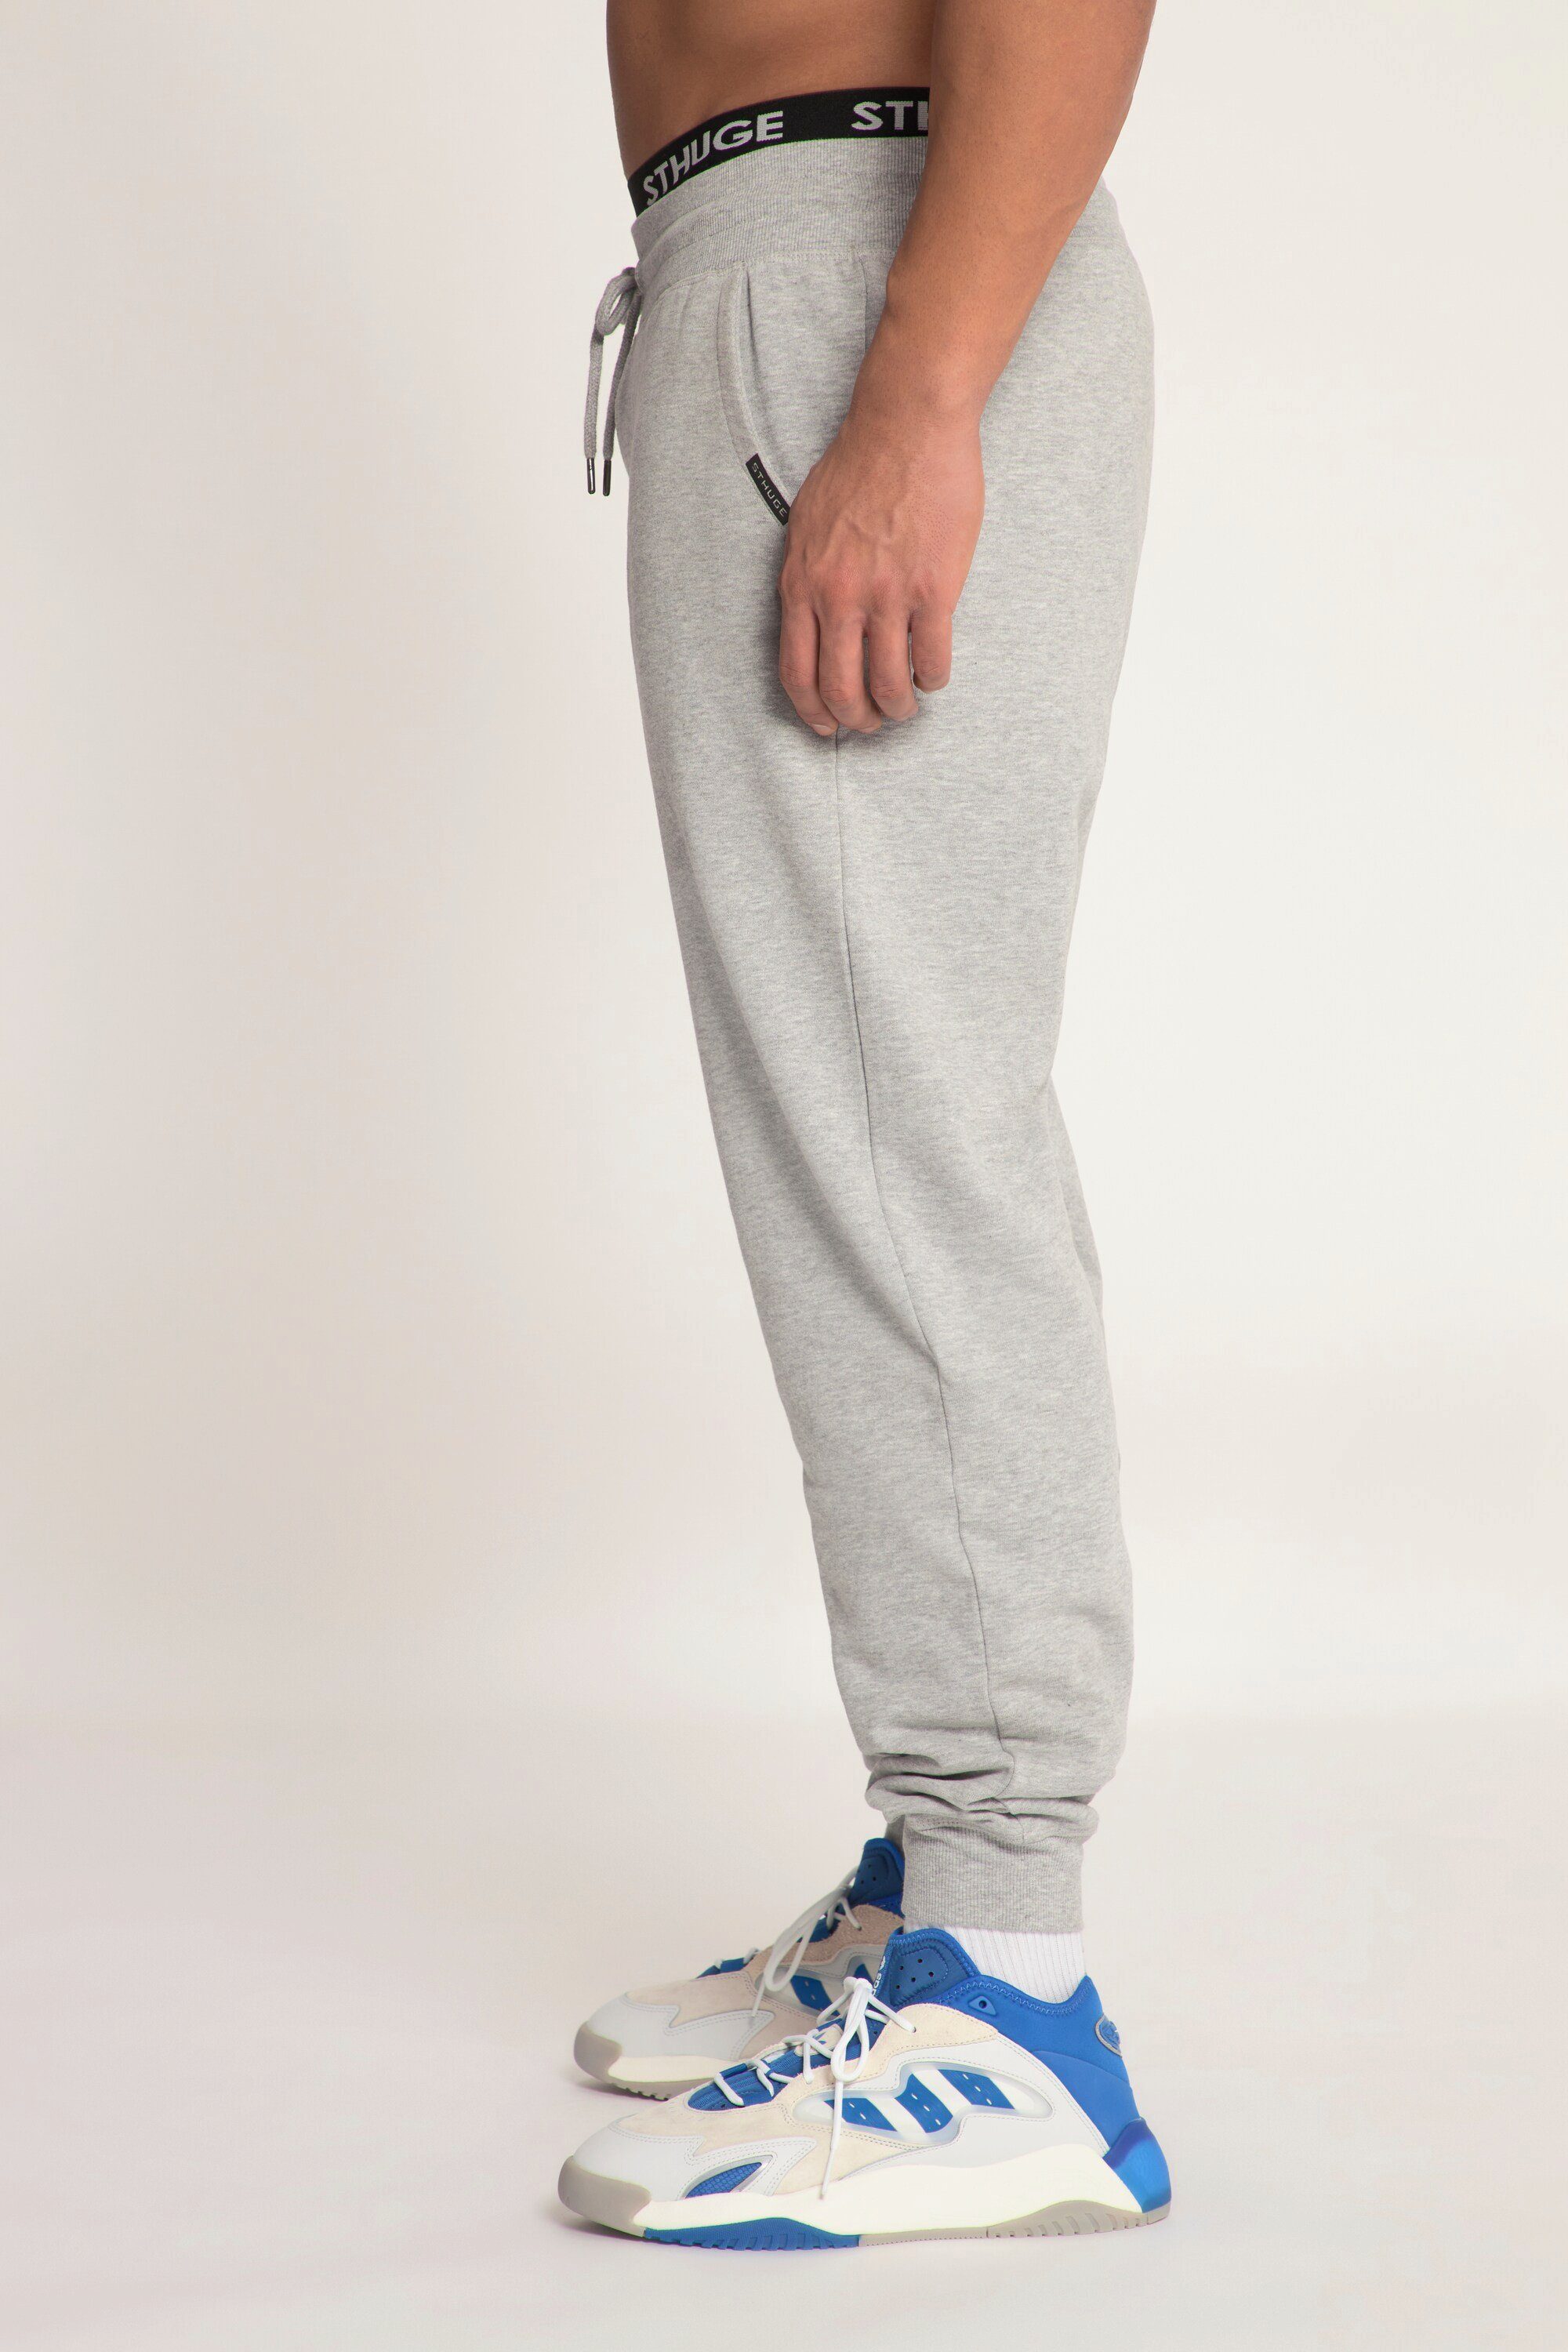 Relaxed Taschen STHUGE Jogginghose Fit STHUGE mit Sweathose